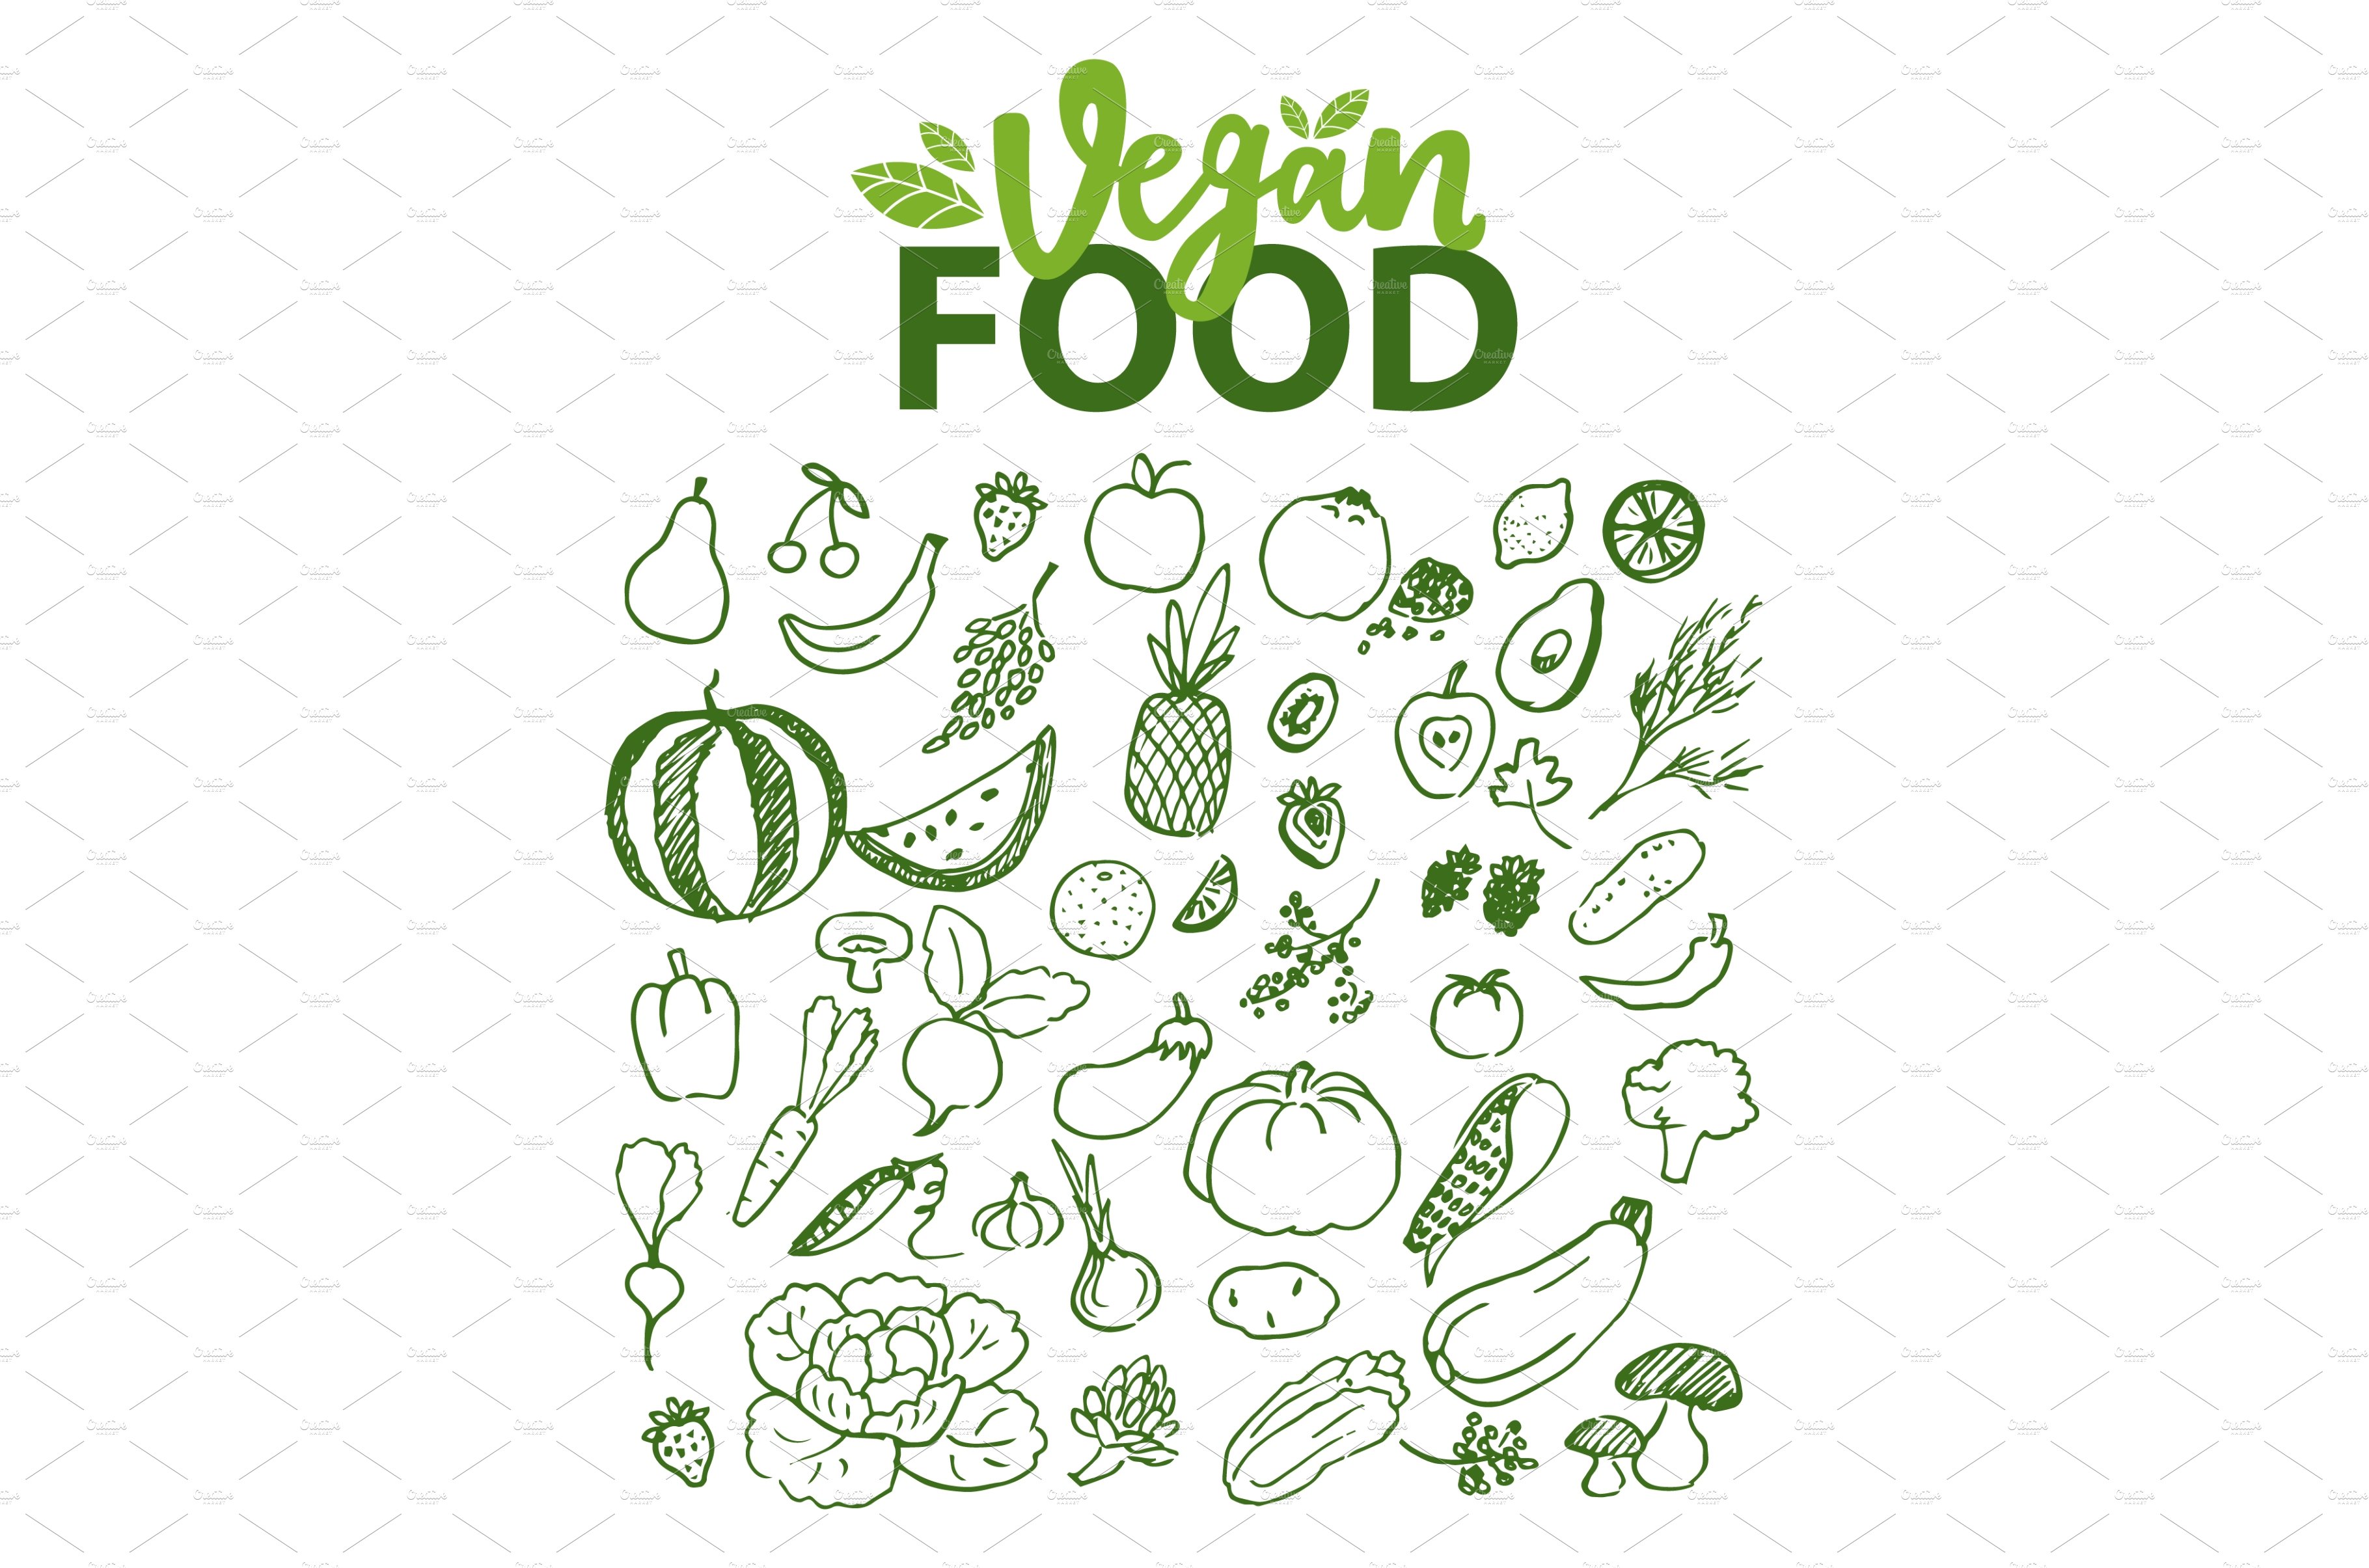 Vegan Food Fresh Products cover image.